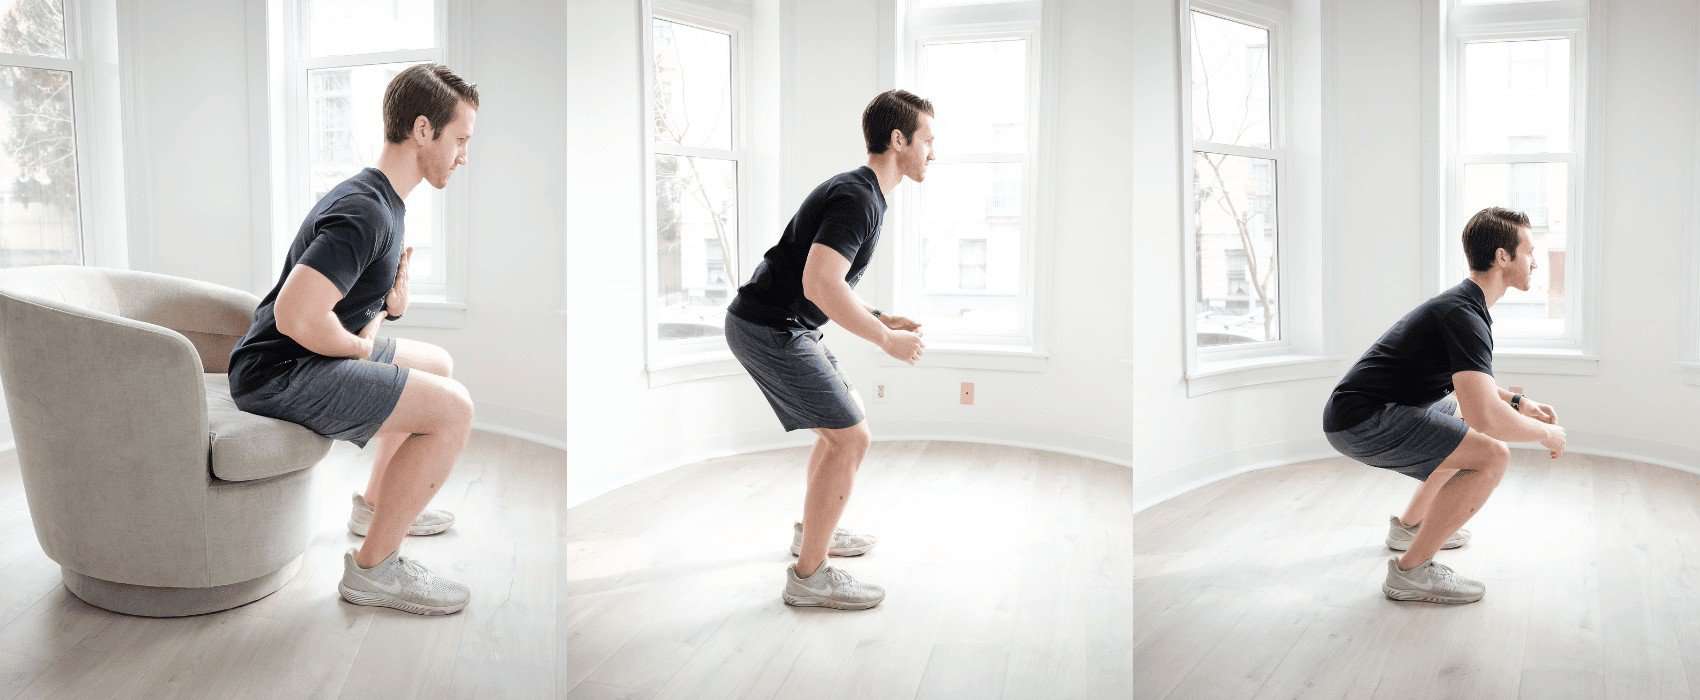 Squat Exercise Variations MovementX Physical Therapy